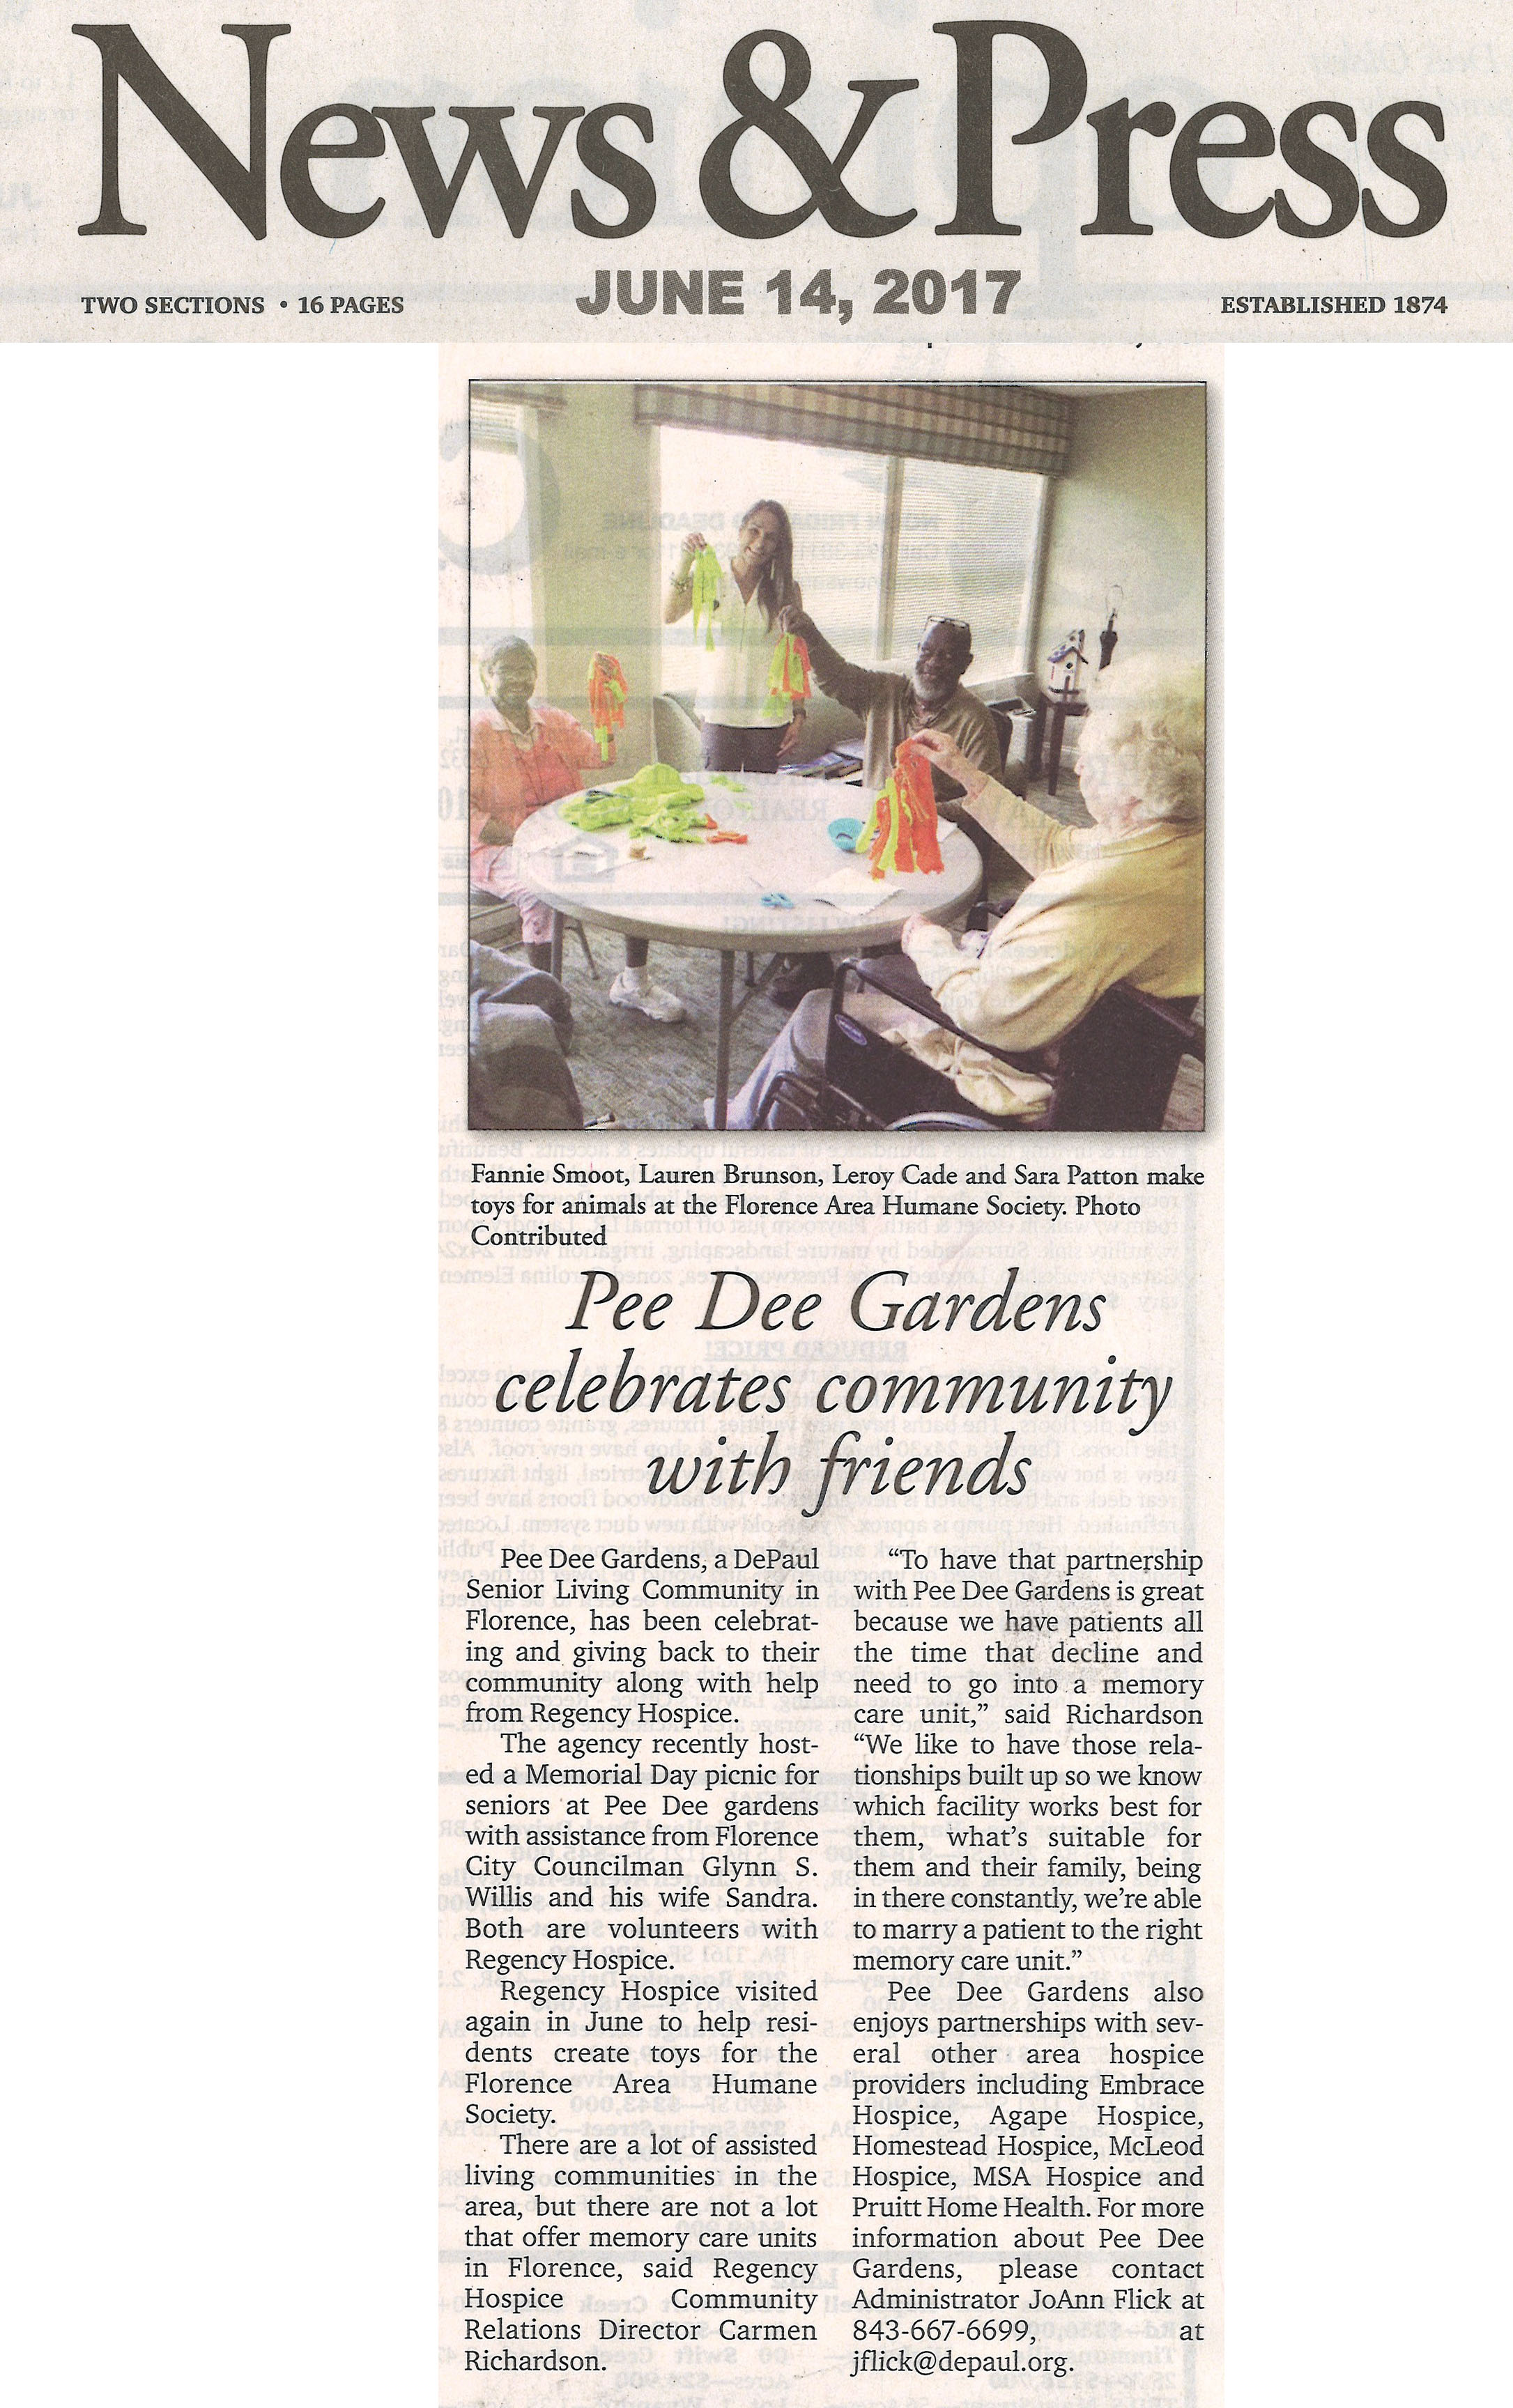 Pee Dee Gardens celebrates community with friends story in the News and Press June 14, 2017